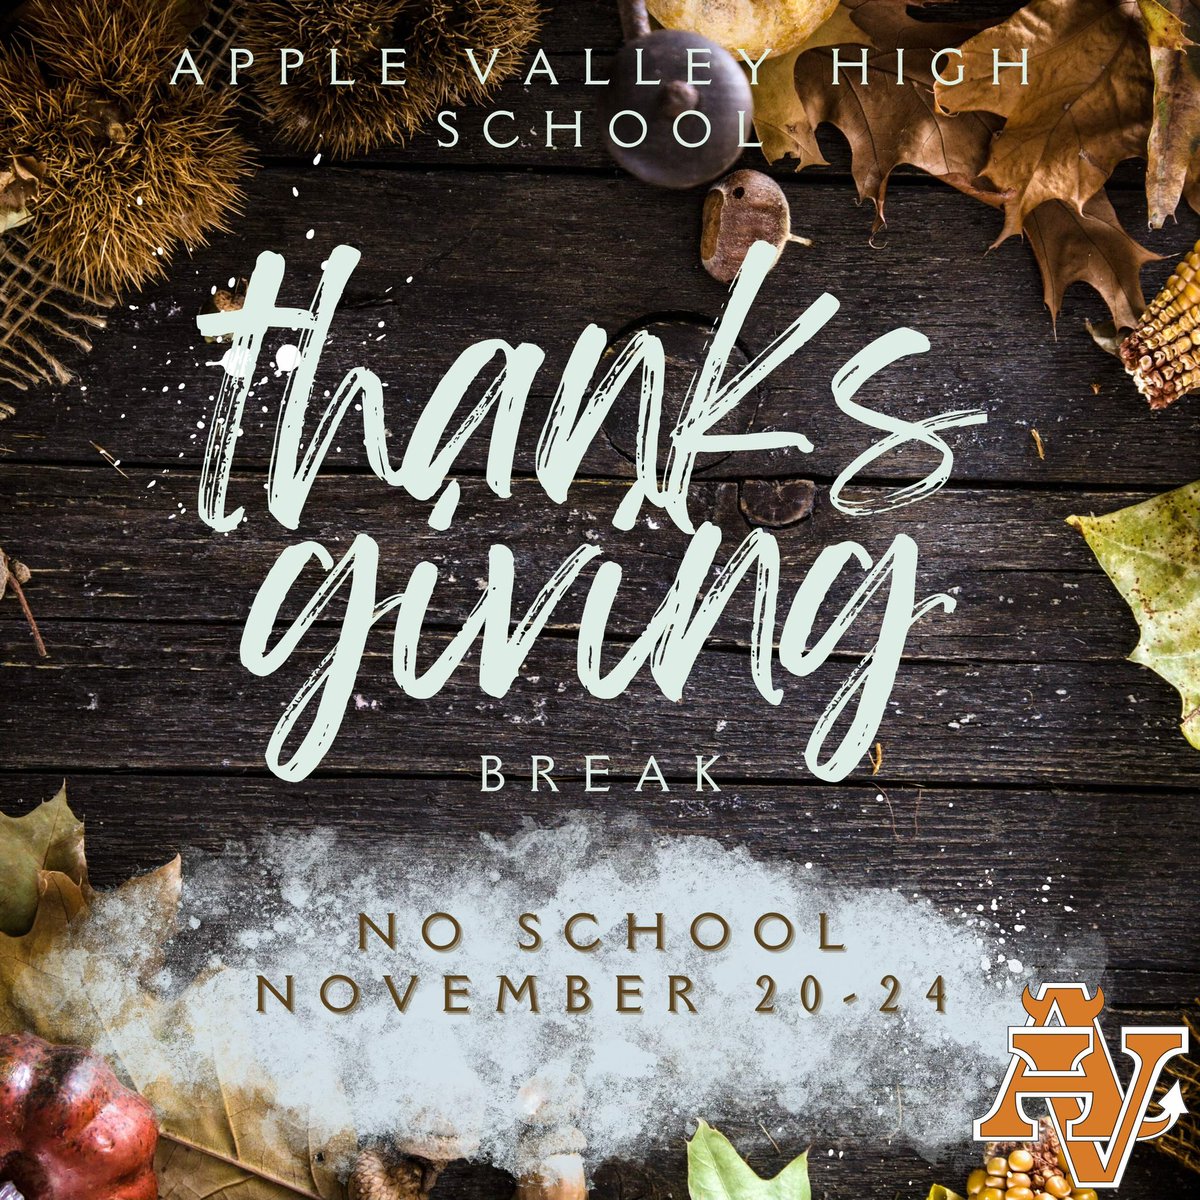 🦃There will be no school next week, November 20-24 due to Thanksgiving Break. We hope you all have a wonderful break with your friends and family. We will see you back at AVHS on November 27th. • #GoDevils #SunDevilPrideIsContagious #HighSchoolNews #HighSchool #AppleValley